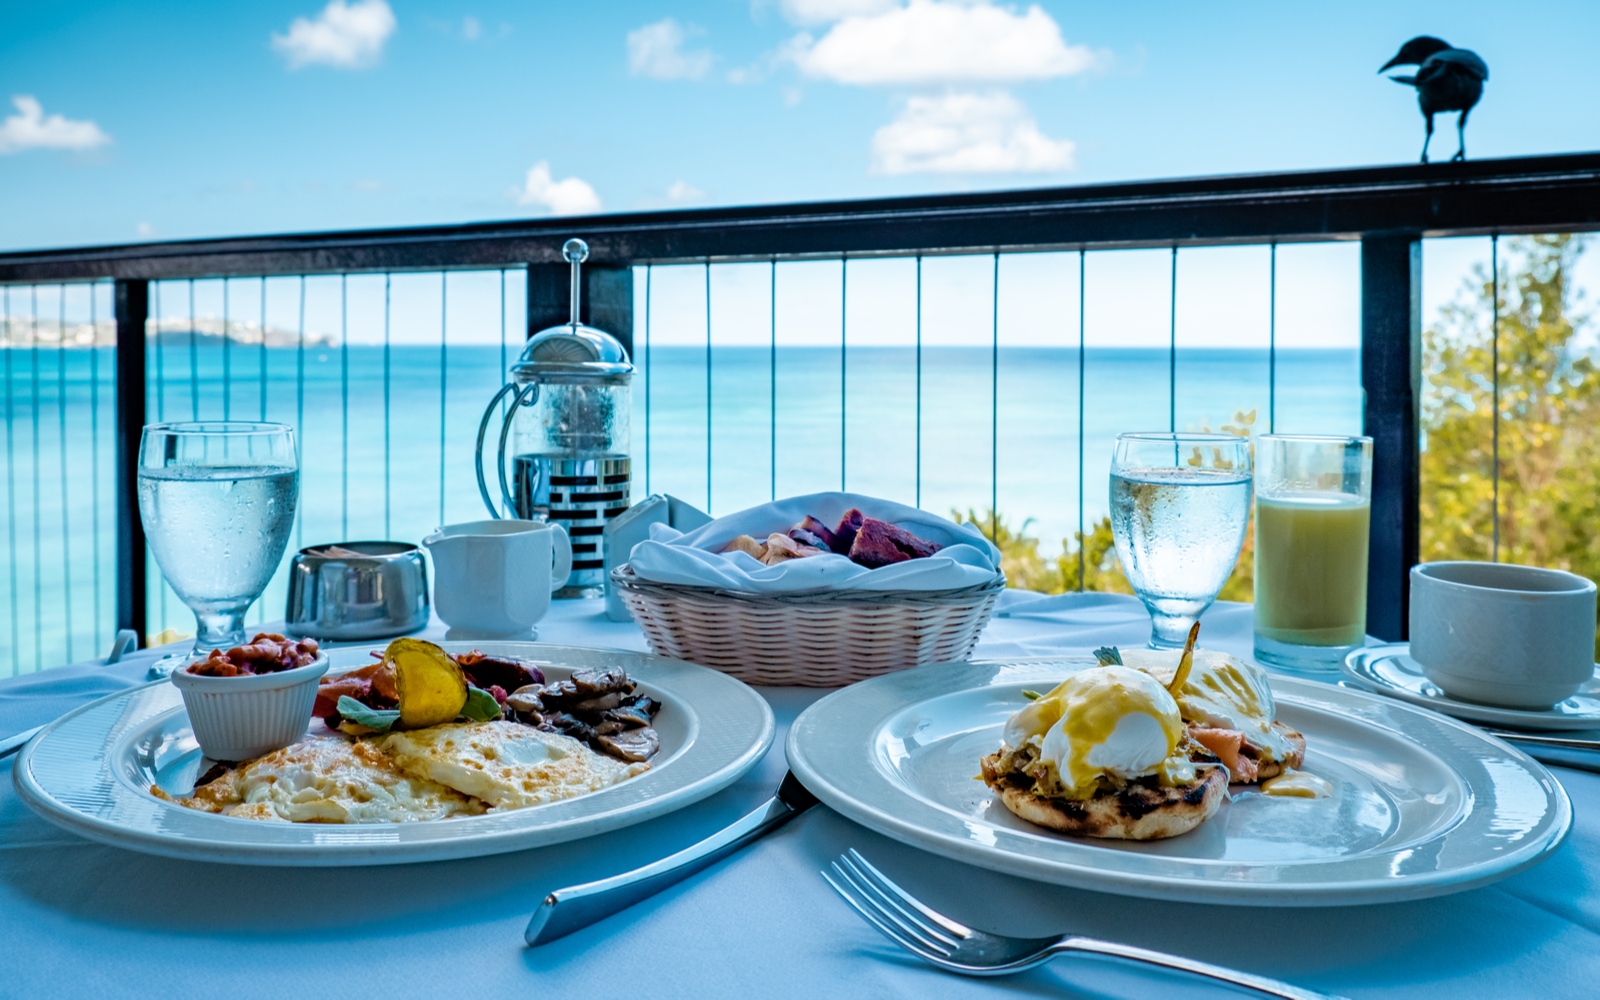 Breakfast at one of the best restaurants in St. Lucia, overlooking the ocean